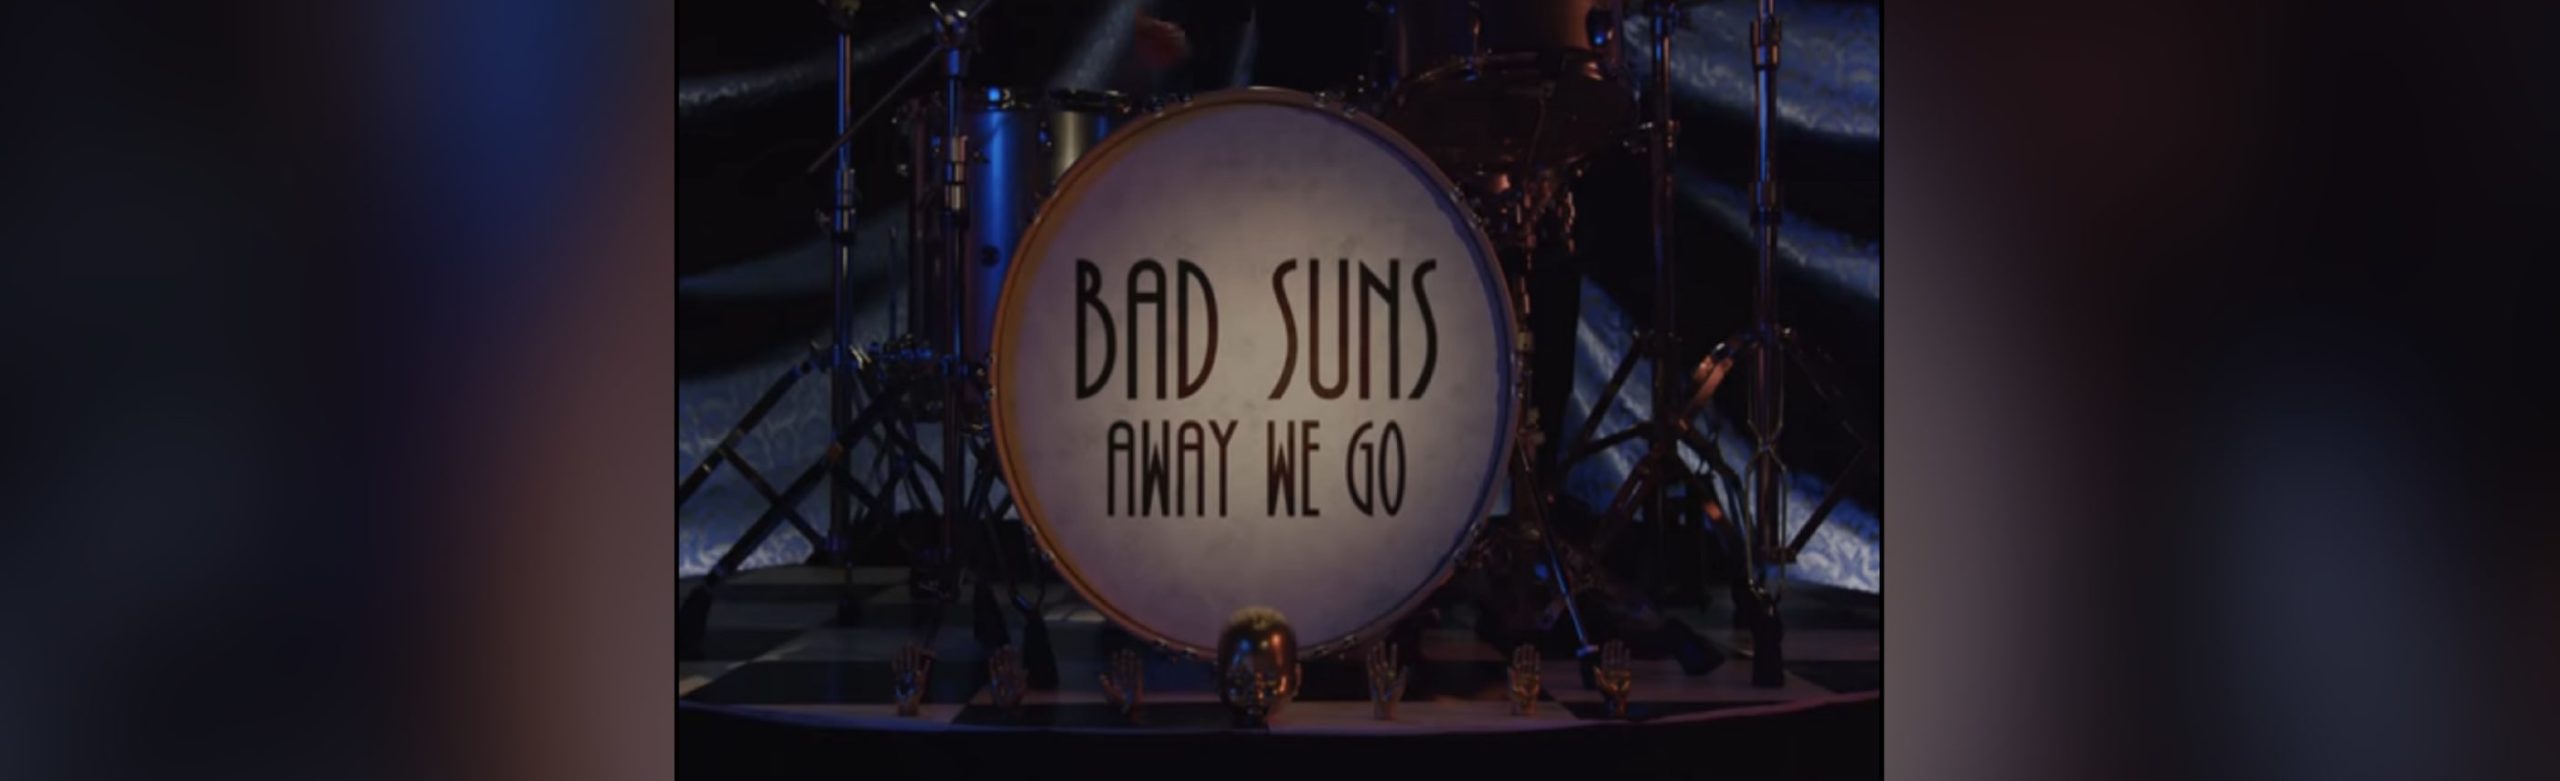 Bad Suns Reveal Video for “Away We Go” Image